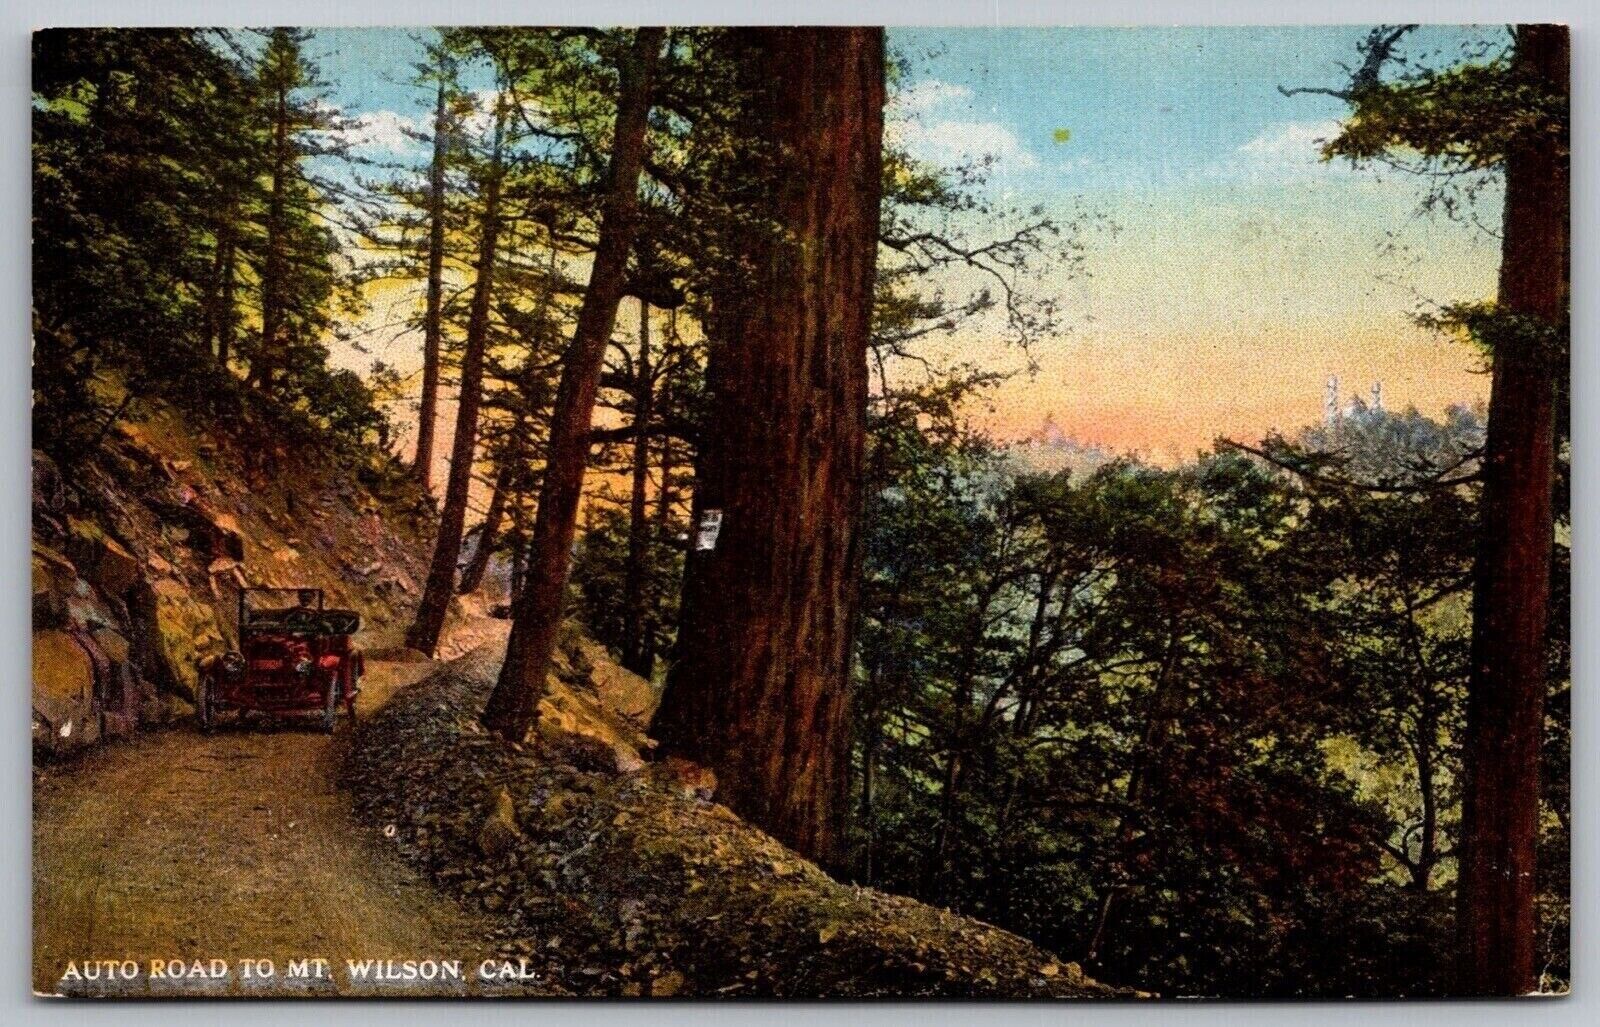 Auto Country Road Mount Wilson California Forest Old Car Vintage UNP Postcard